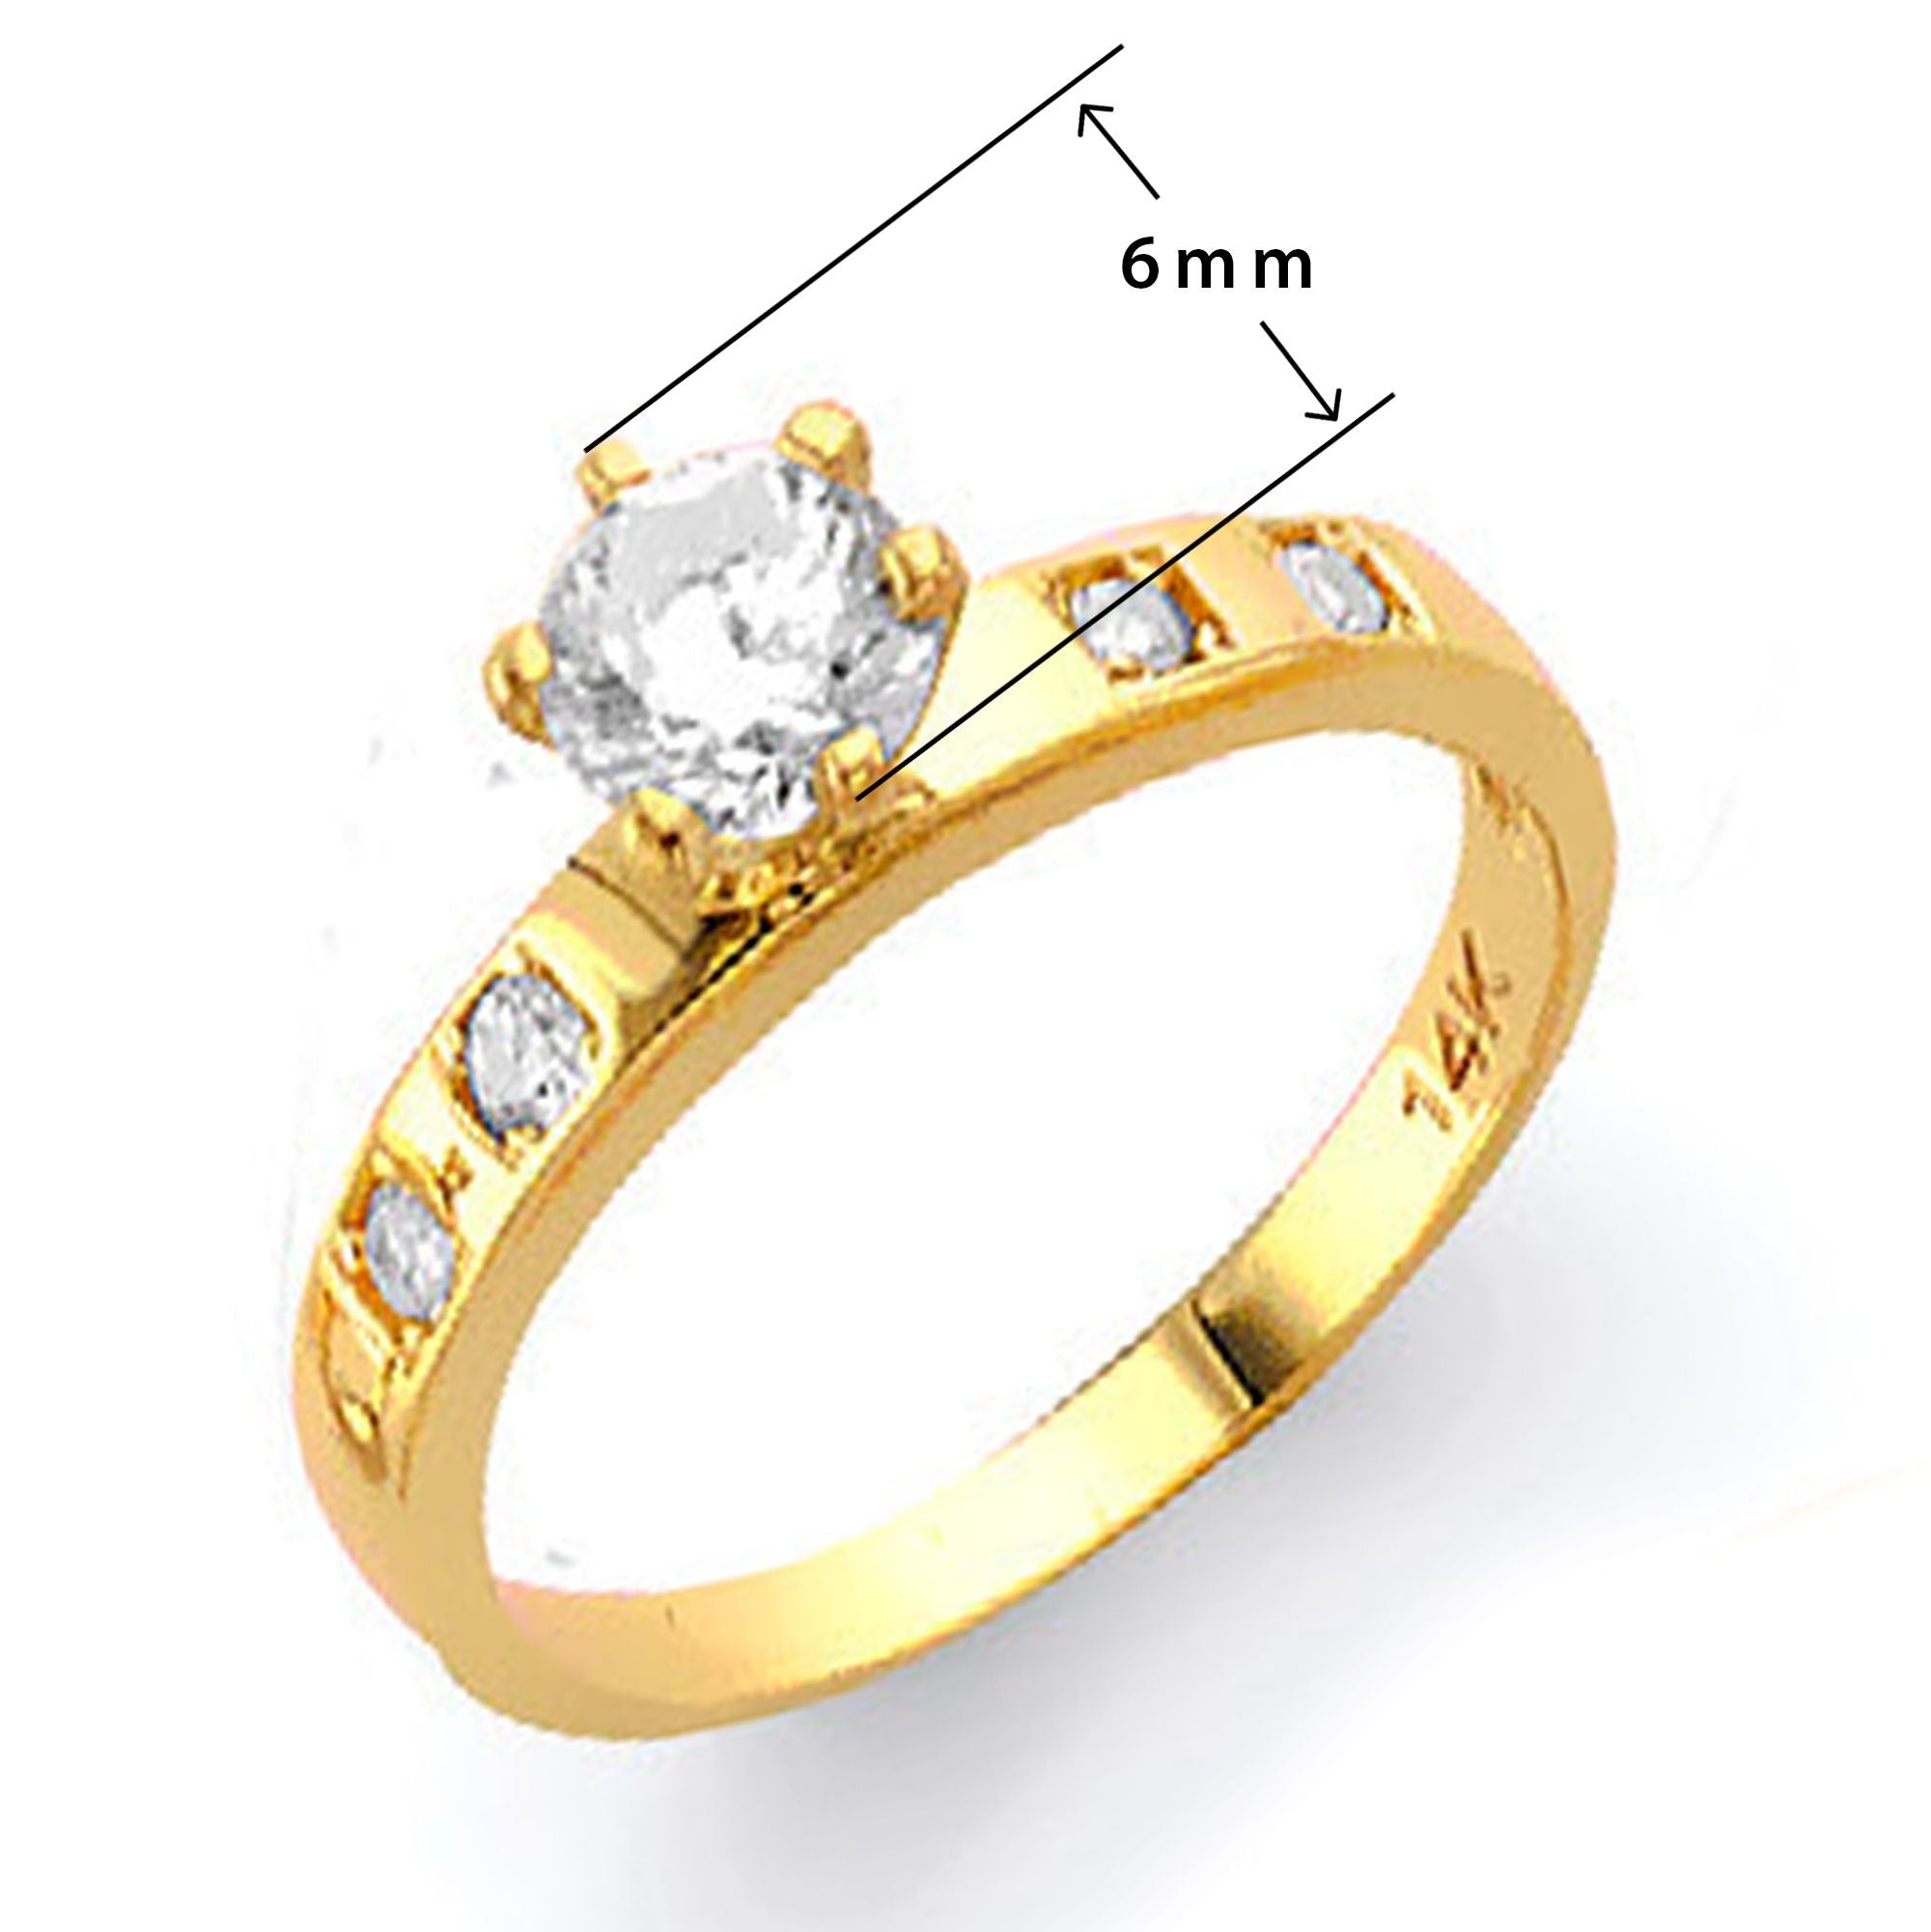 Artistic Diamond Love Band for Couples in Solid Gold with Measurement